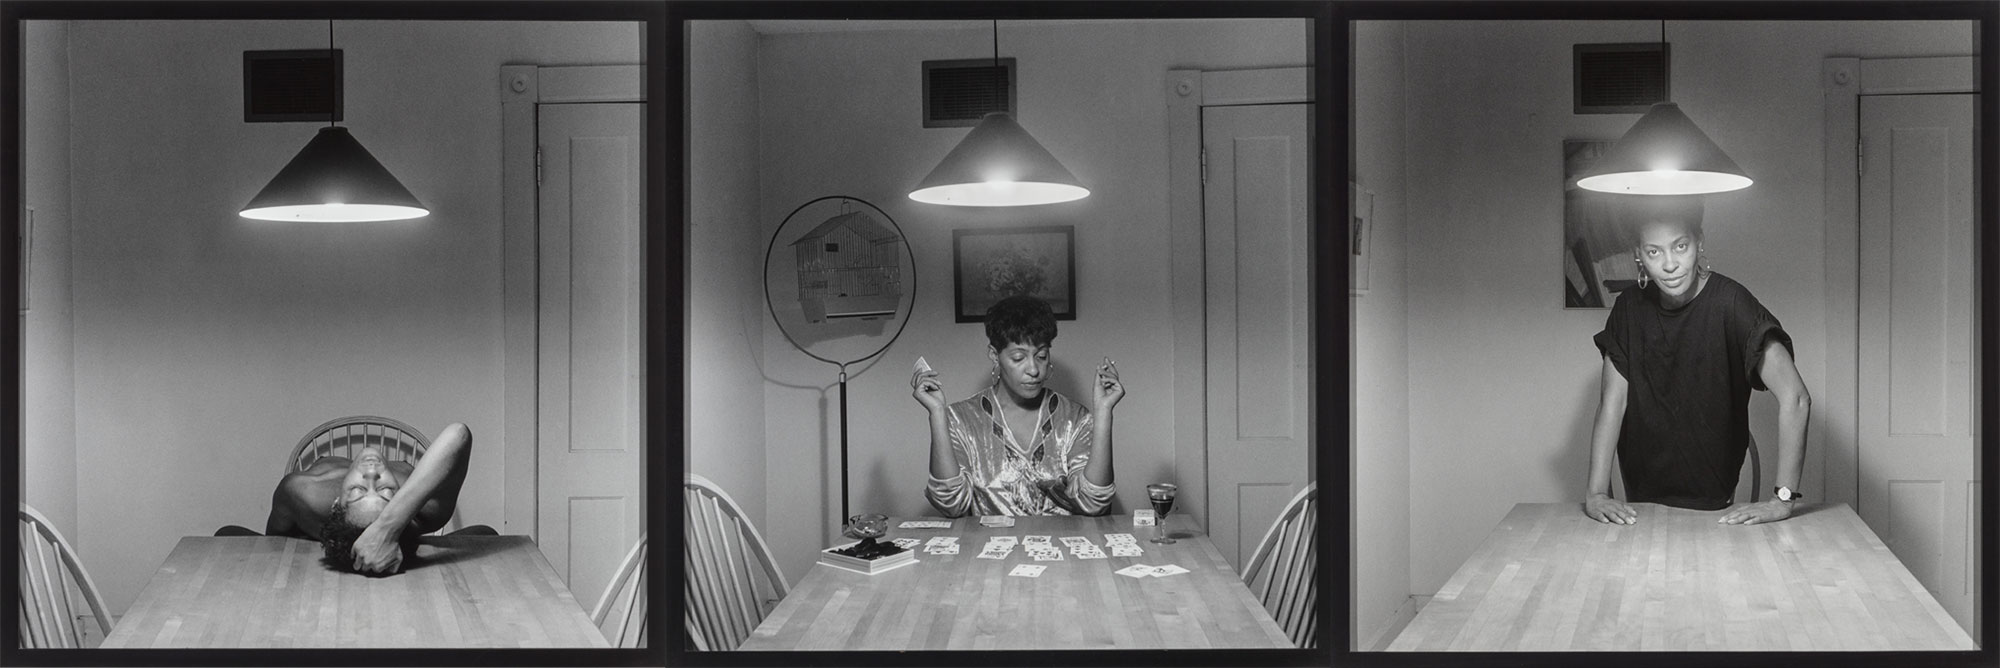 Carrie Mae Weems, Untitled, 1990 